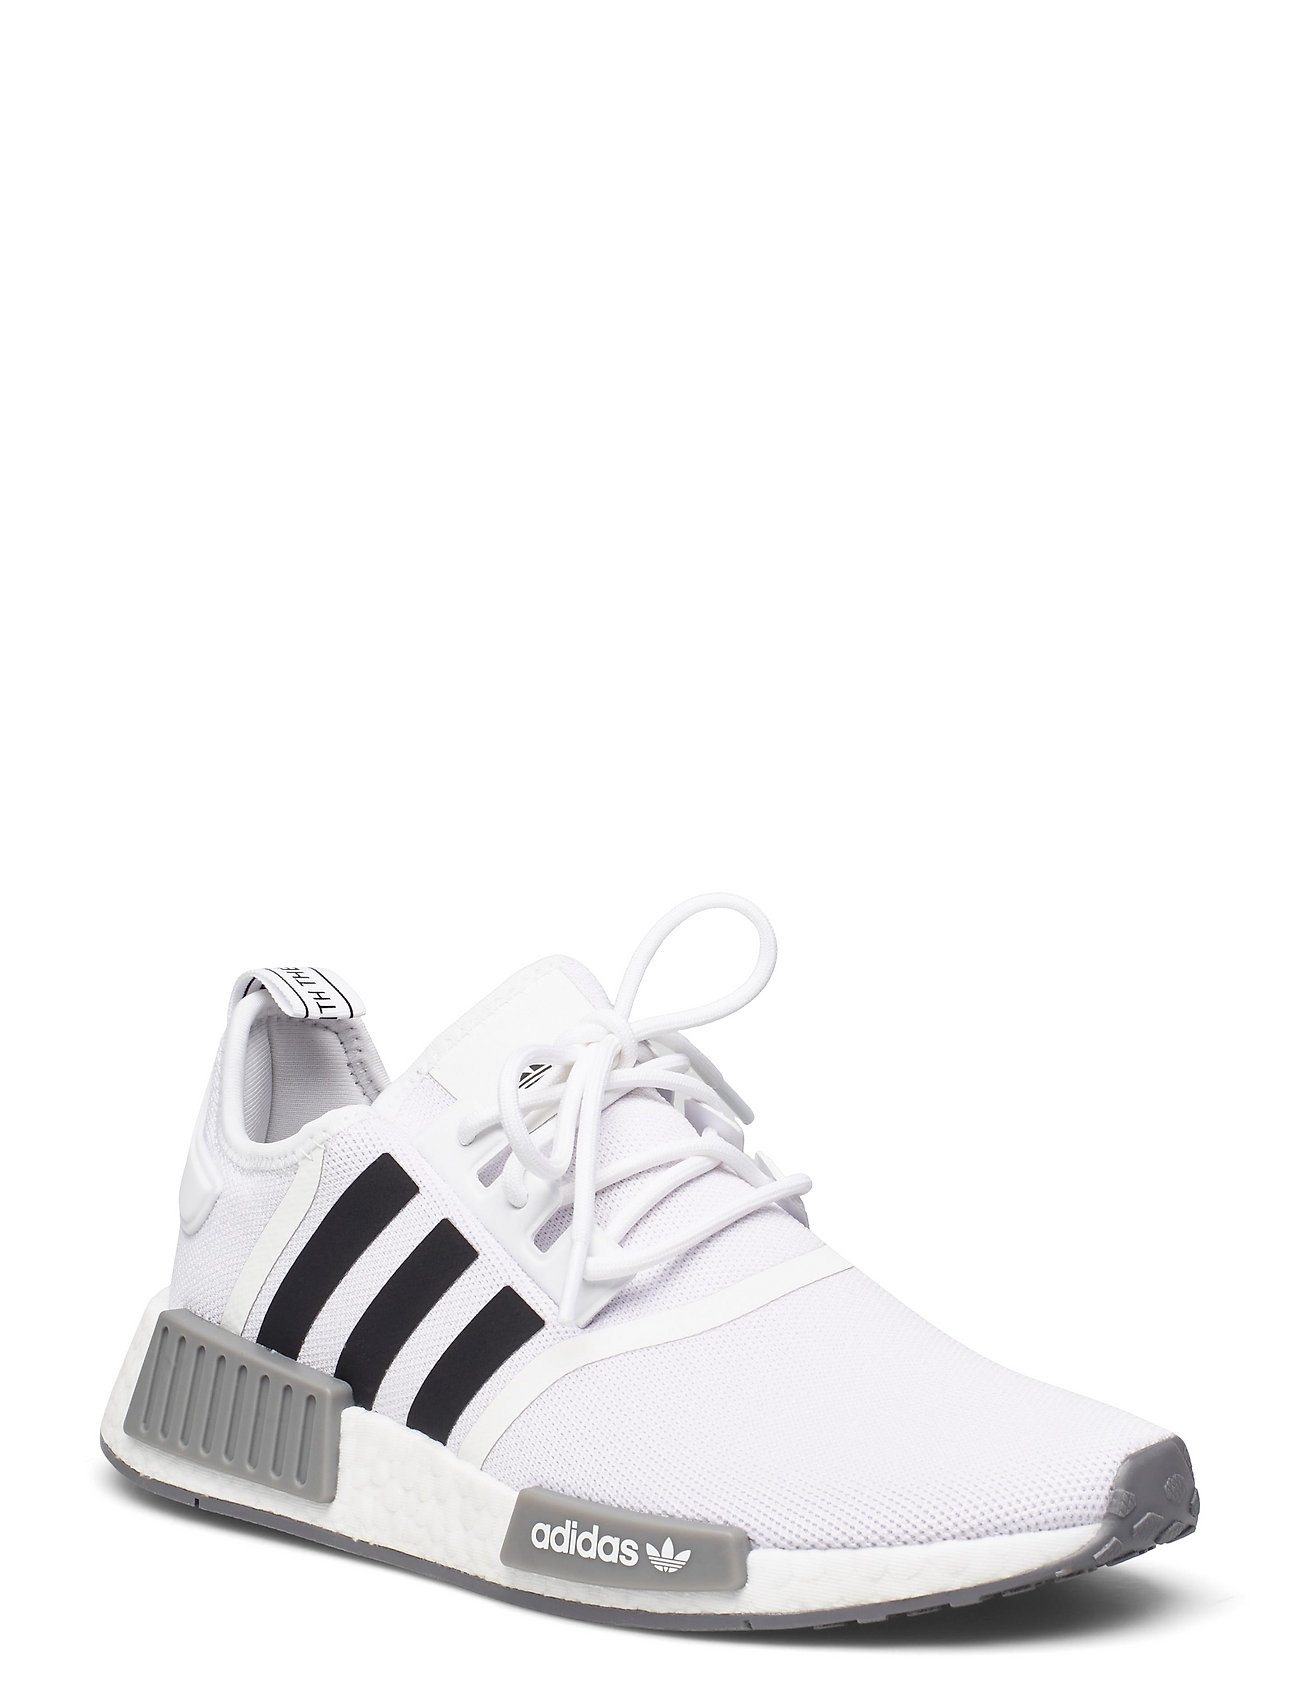 Nmd_R1 Low-top Sneakers White Adidas Originals